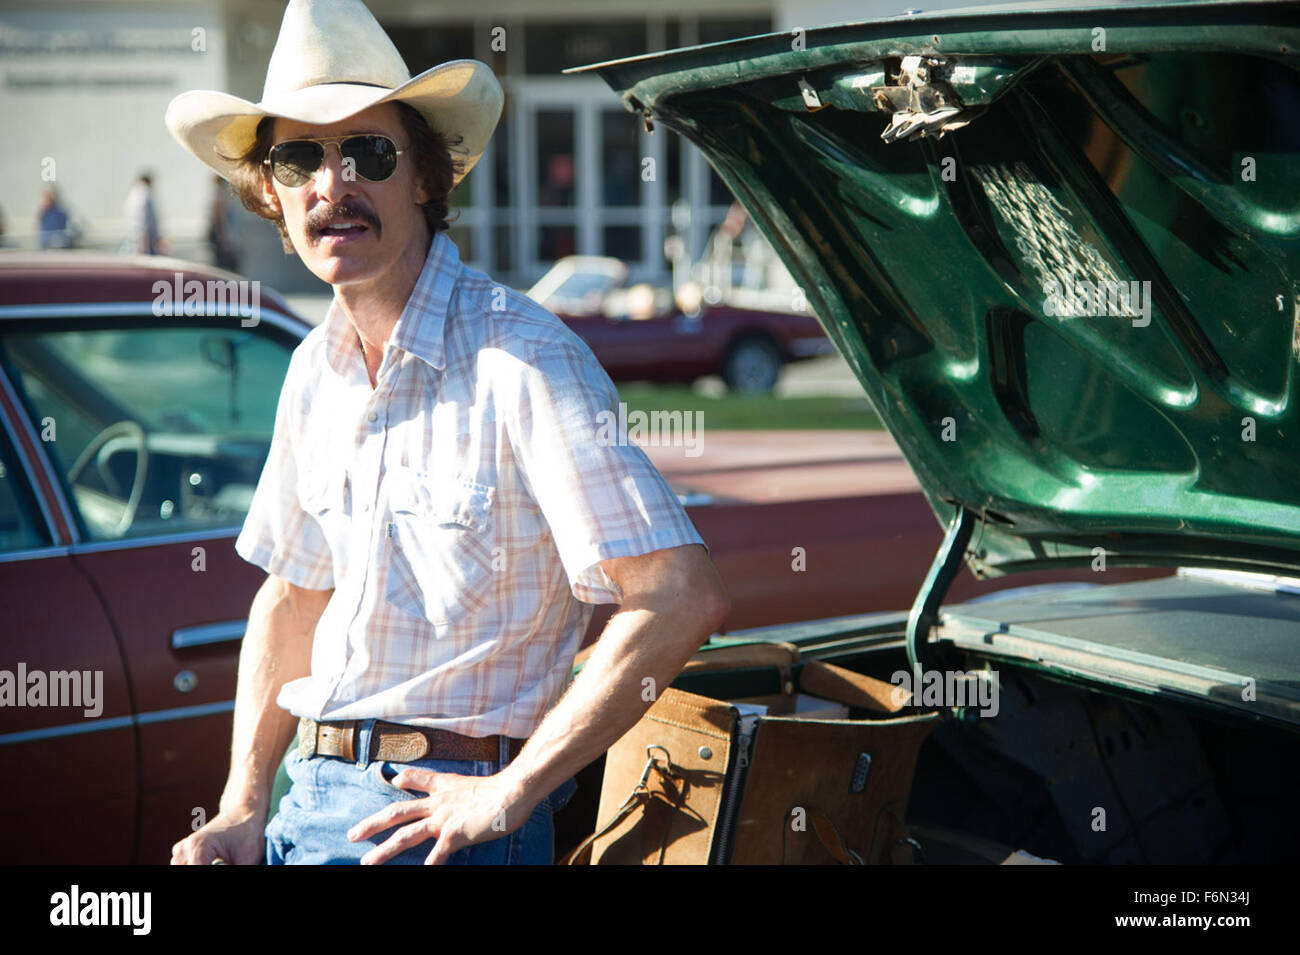 June 15, 2013 - No Merchandising. Editorial Use Only. No Book Cover Usage....Dallas Buyers Club, Matthew McConaughey..Dallas Buyers Club - 2013. (Credit Image: c Moviestore/Rex Features) Stock Photo